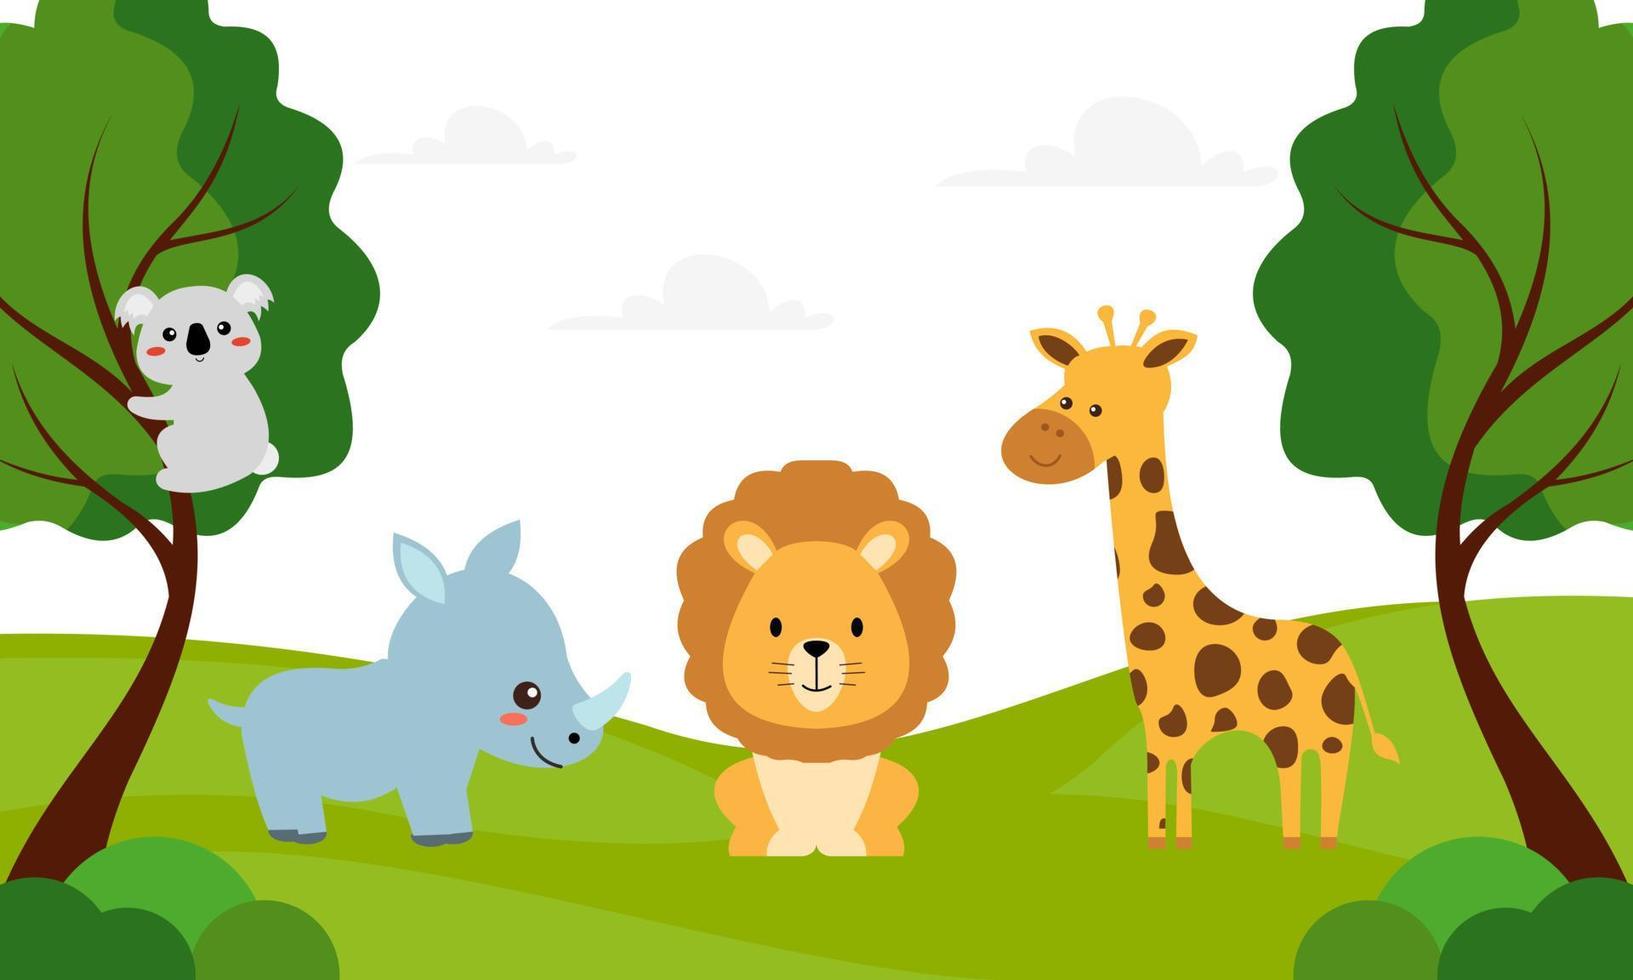 Cute jungle animals in cartoon style, wild animal, zoo designs for background illustration vector